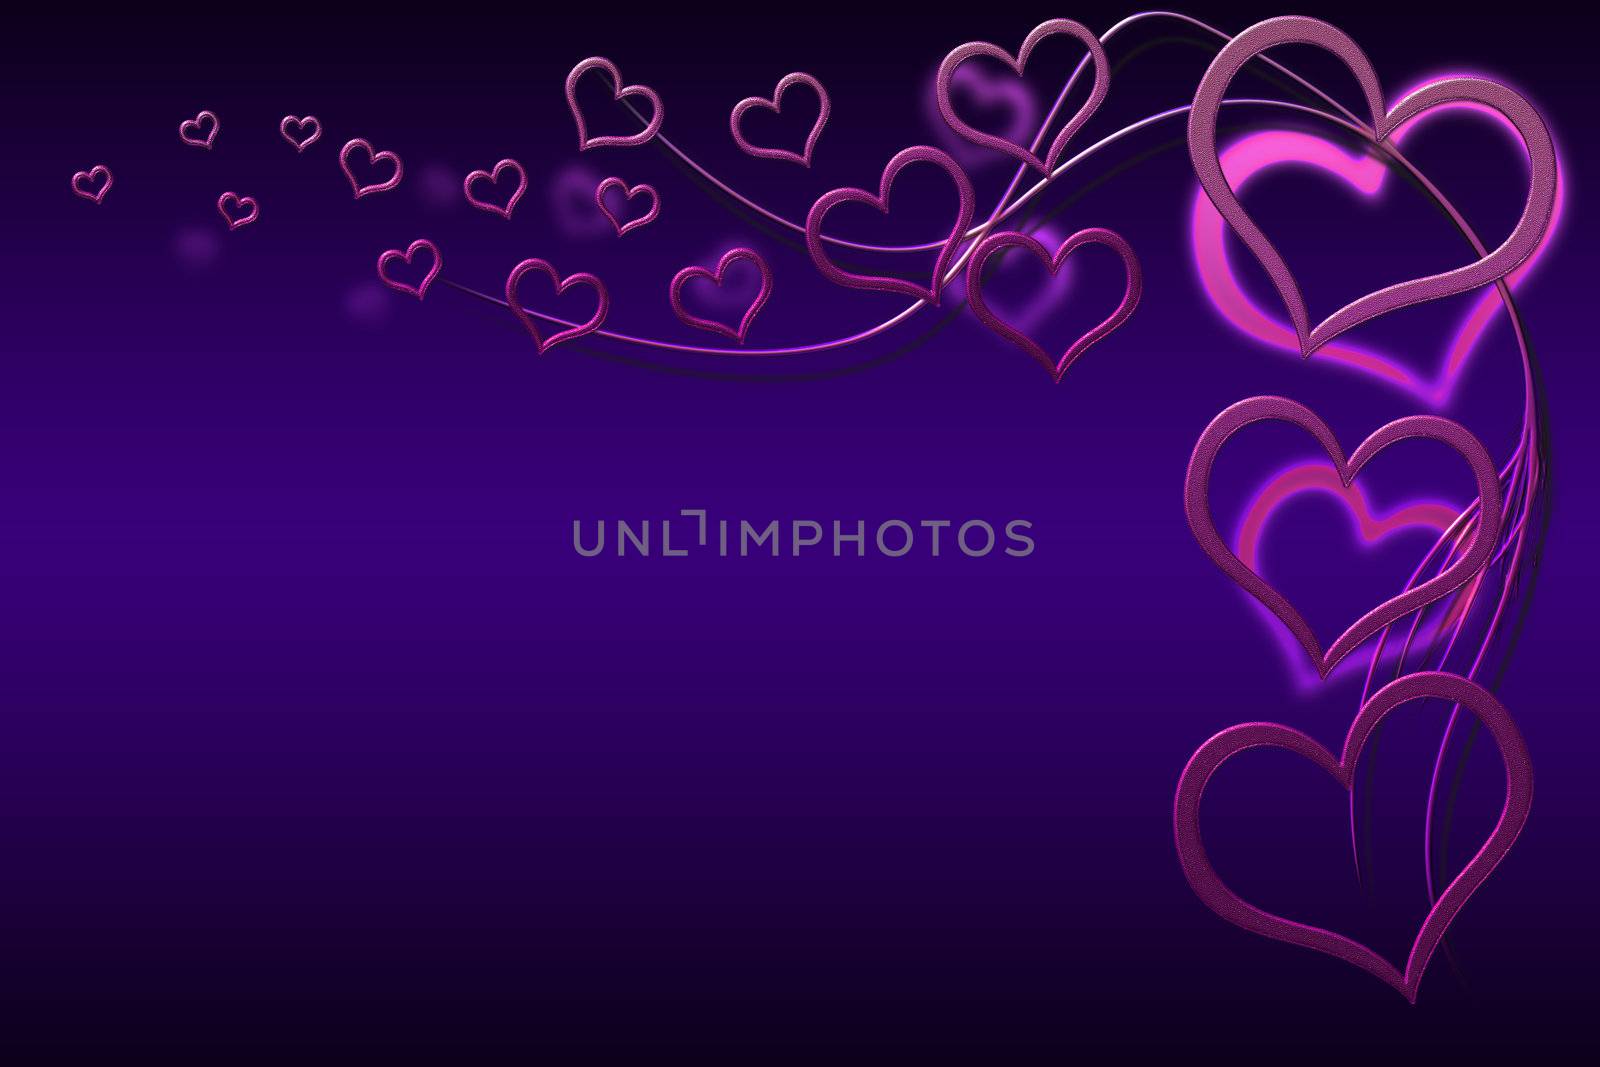 Valentines day background for your designs with pink hearts and swirls on purple background